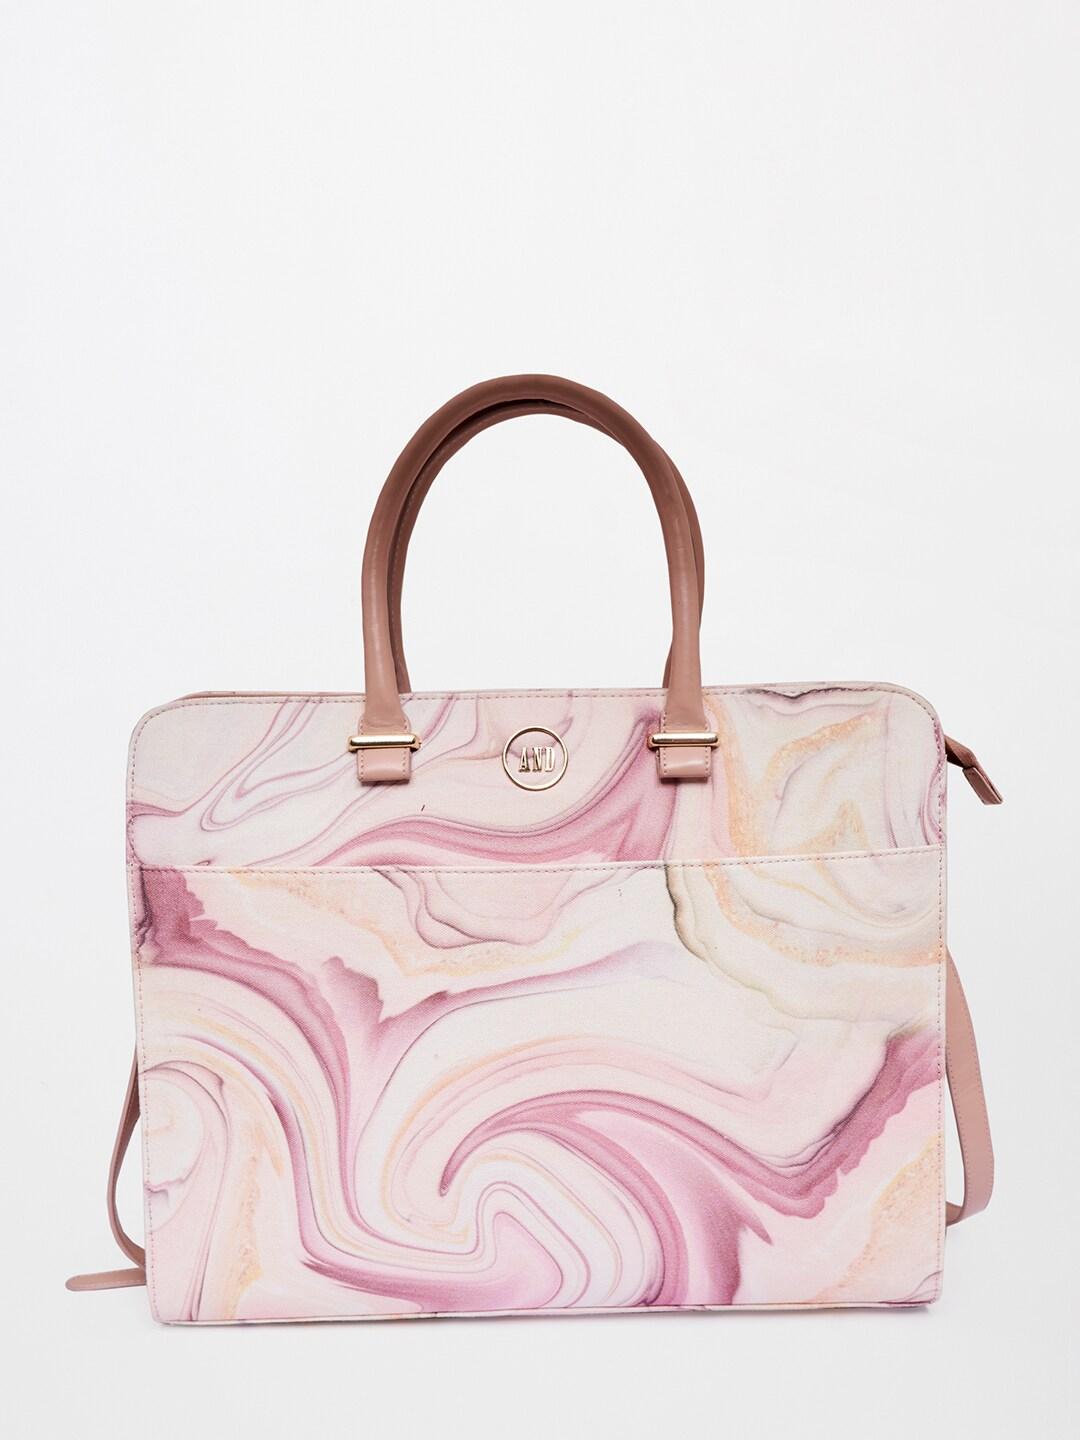 AND Women Pink Printed Structured Handheld Bag